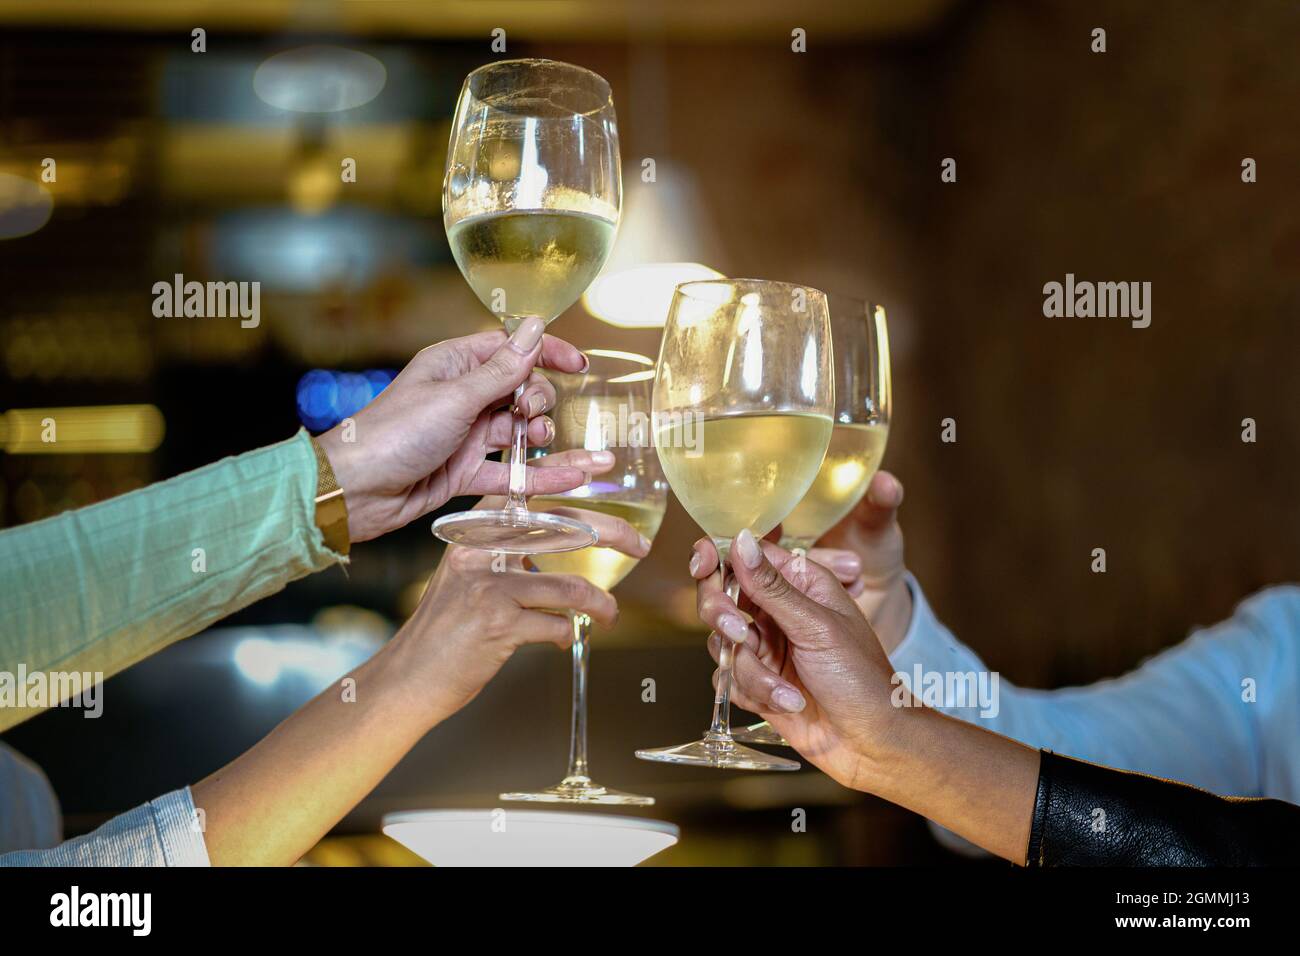 Toast at the restaurant. Detail on the clinkering white wine glasses. Concept of friends having a toast together by raising their wineglasses. Stock Photo